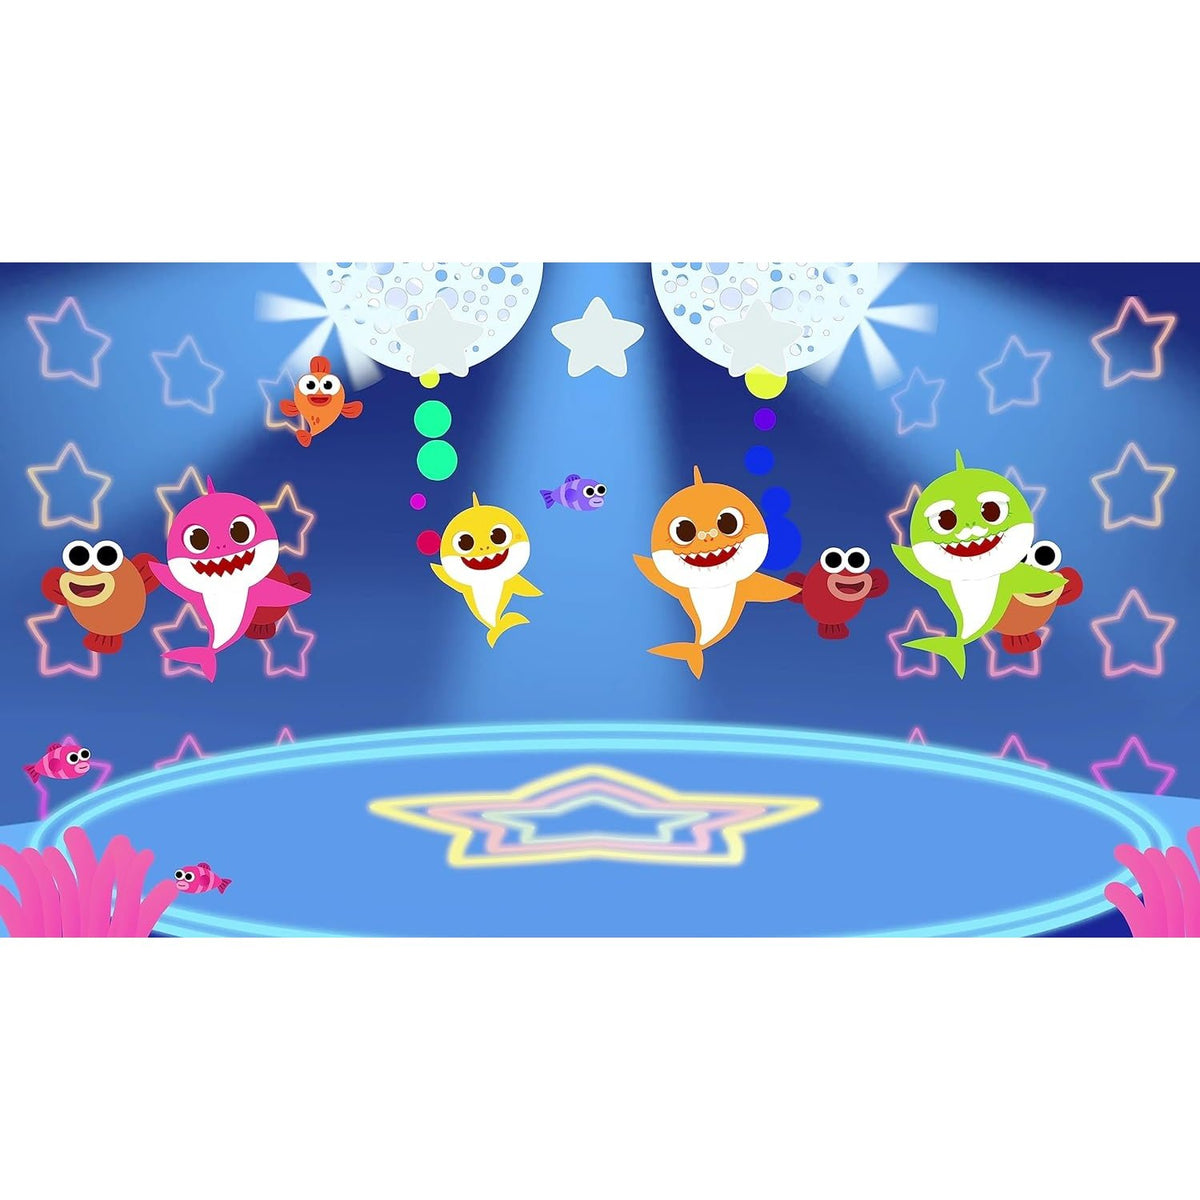 Baby Shark: Sing and Swim Party Sony PlayStation 5